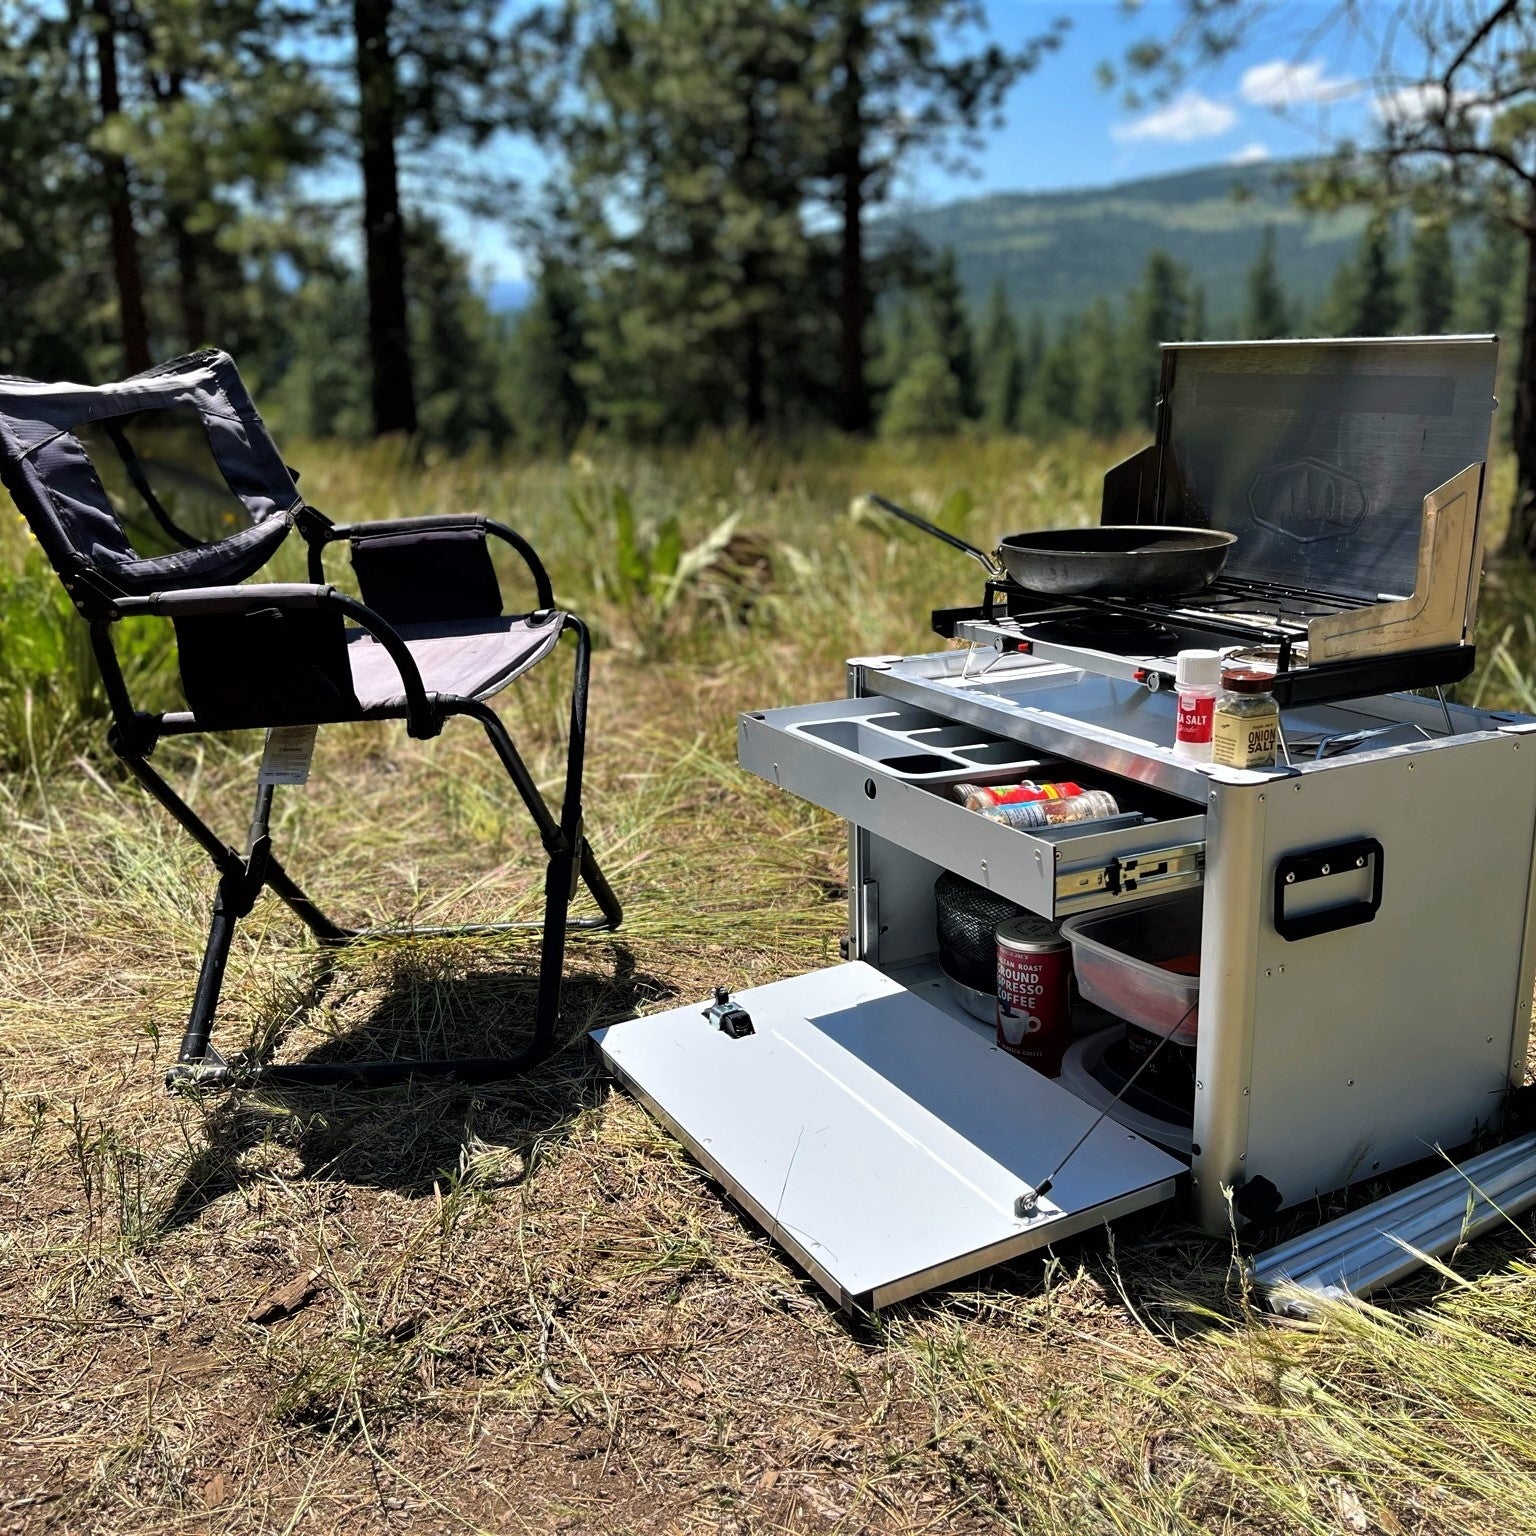 Can't wait to use my new camp kitchen